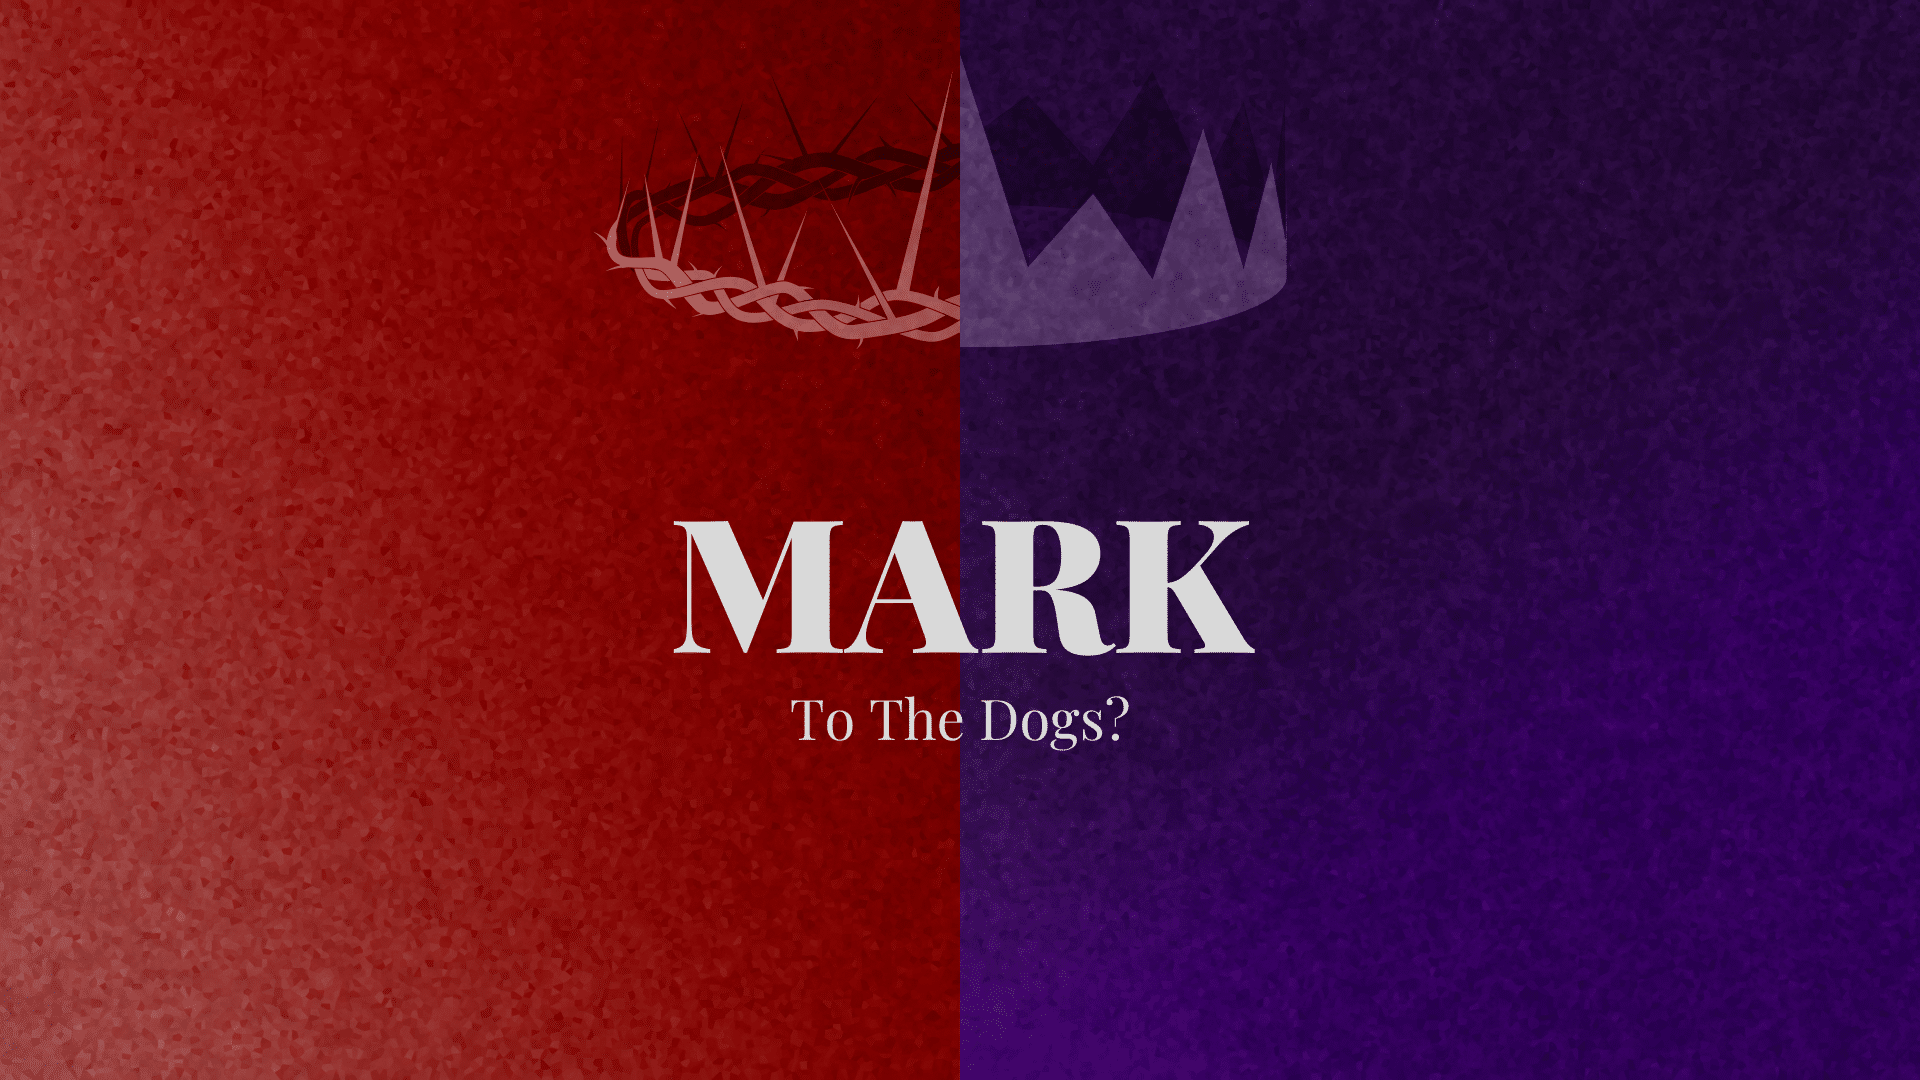 Mark: To The Dogs?